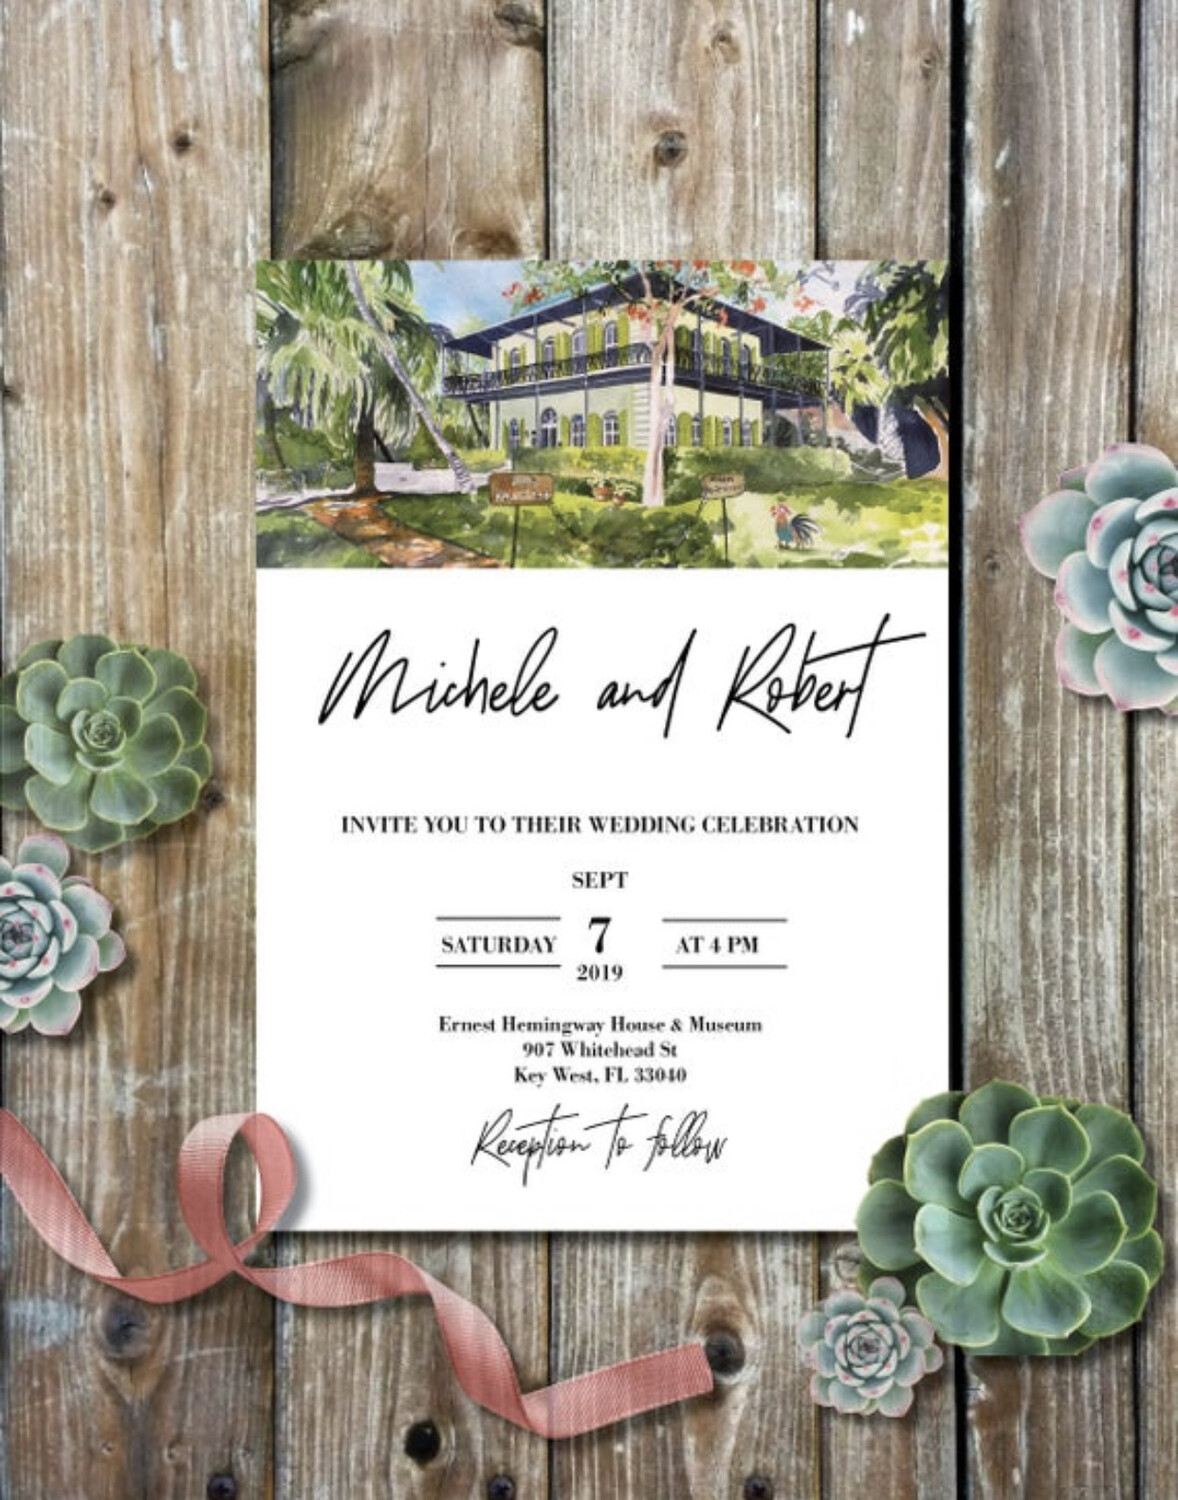 Hemingway Home & Museum in Key West, FL - Wedding Invitations on Luxurious Paper with Envelopes - Set of 25 - Watercolor Invitation 